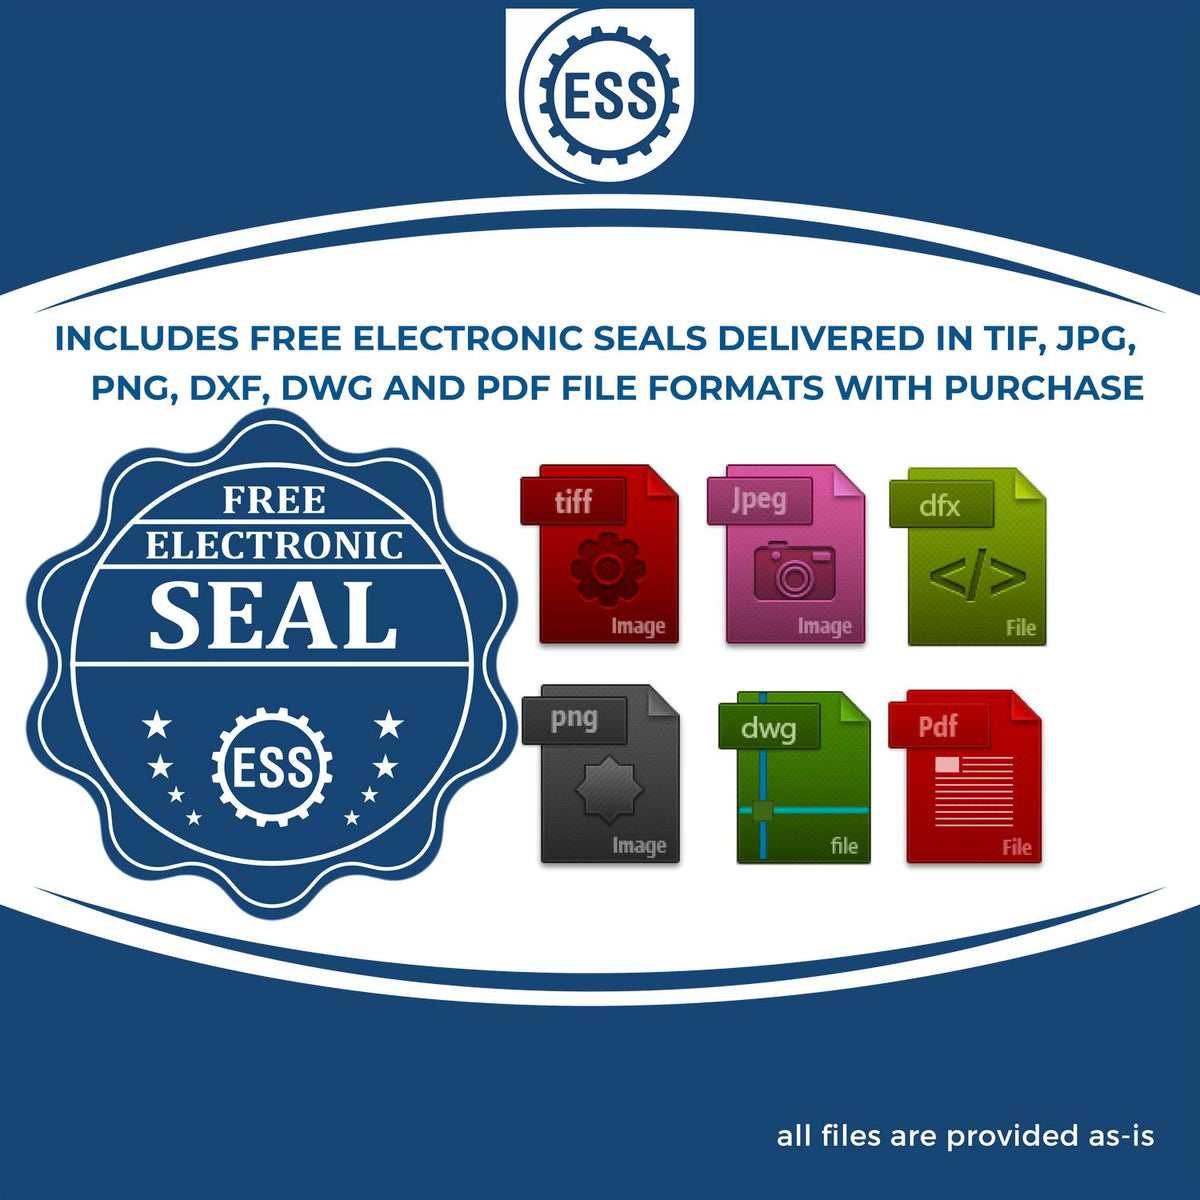 An infographic for the free electronic seal for the Ohio Engineer Desk Seal illustrating the different file type icons such as DXF, DWG, TIF, JPG and PNG.